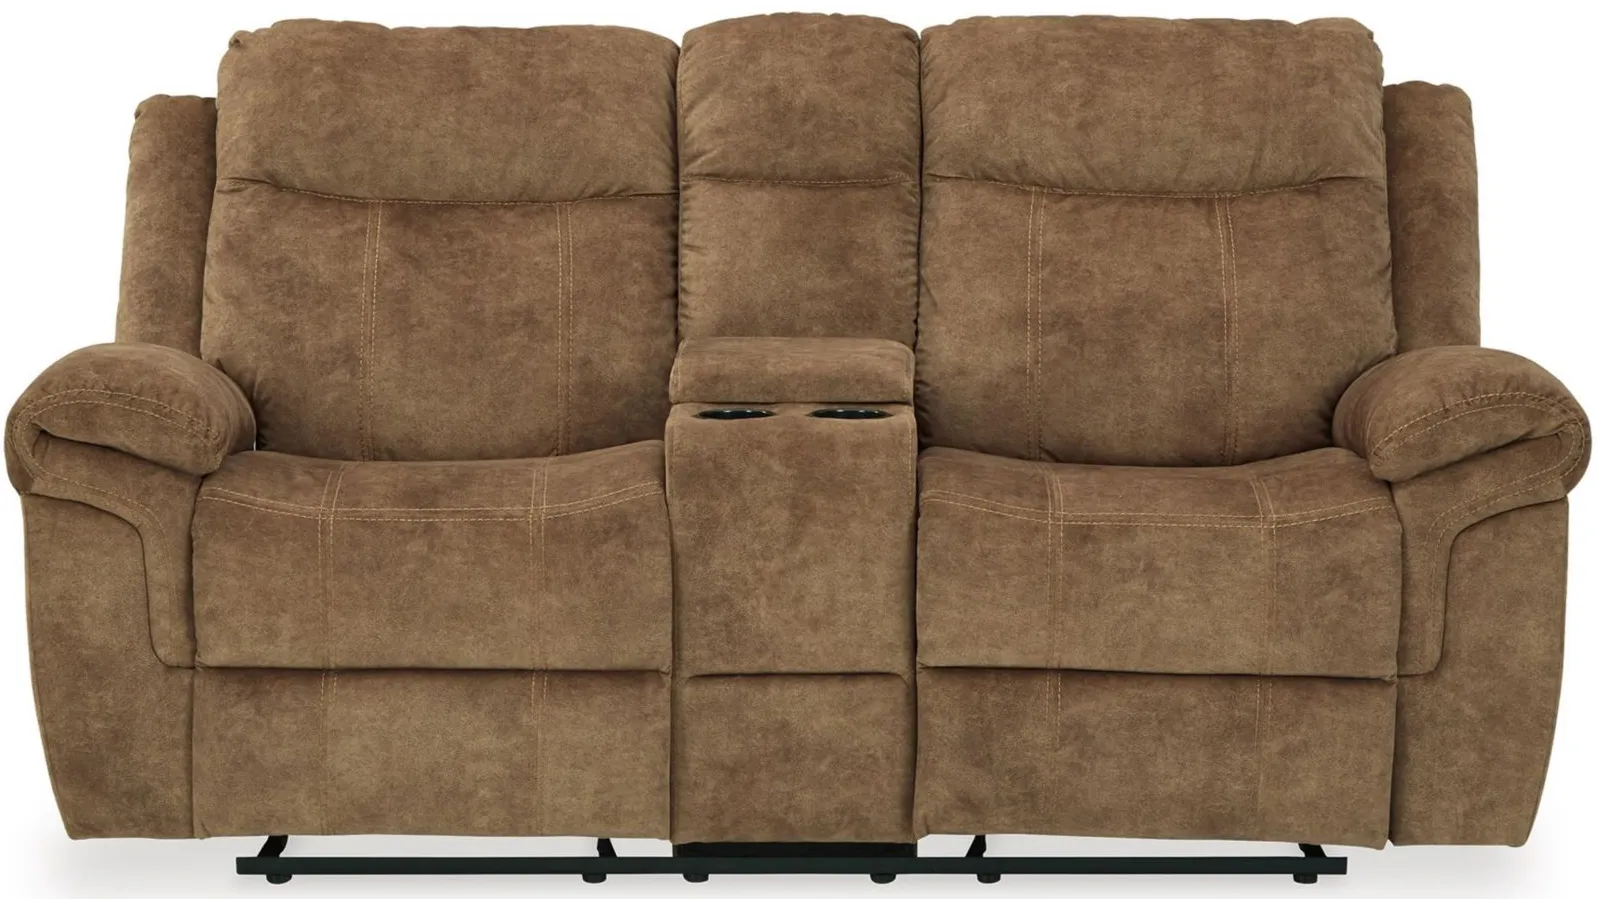 Huddle-Up Glider Reclining Loveseat in Nutmeg by Ashley Furniture